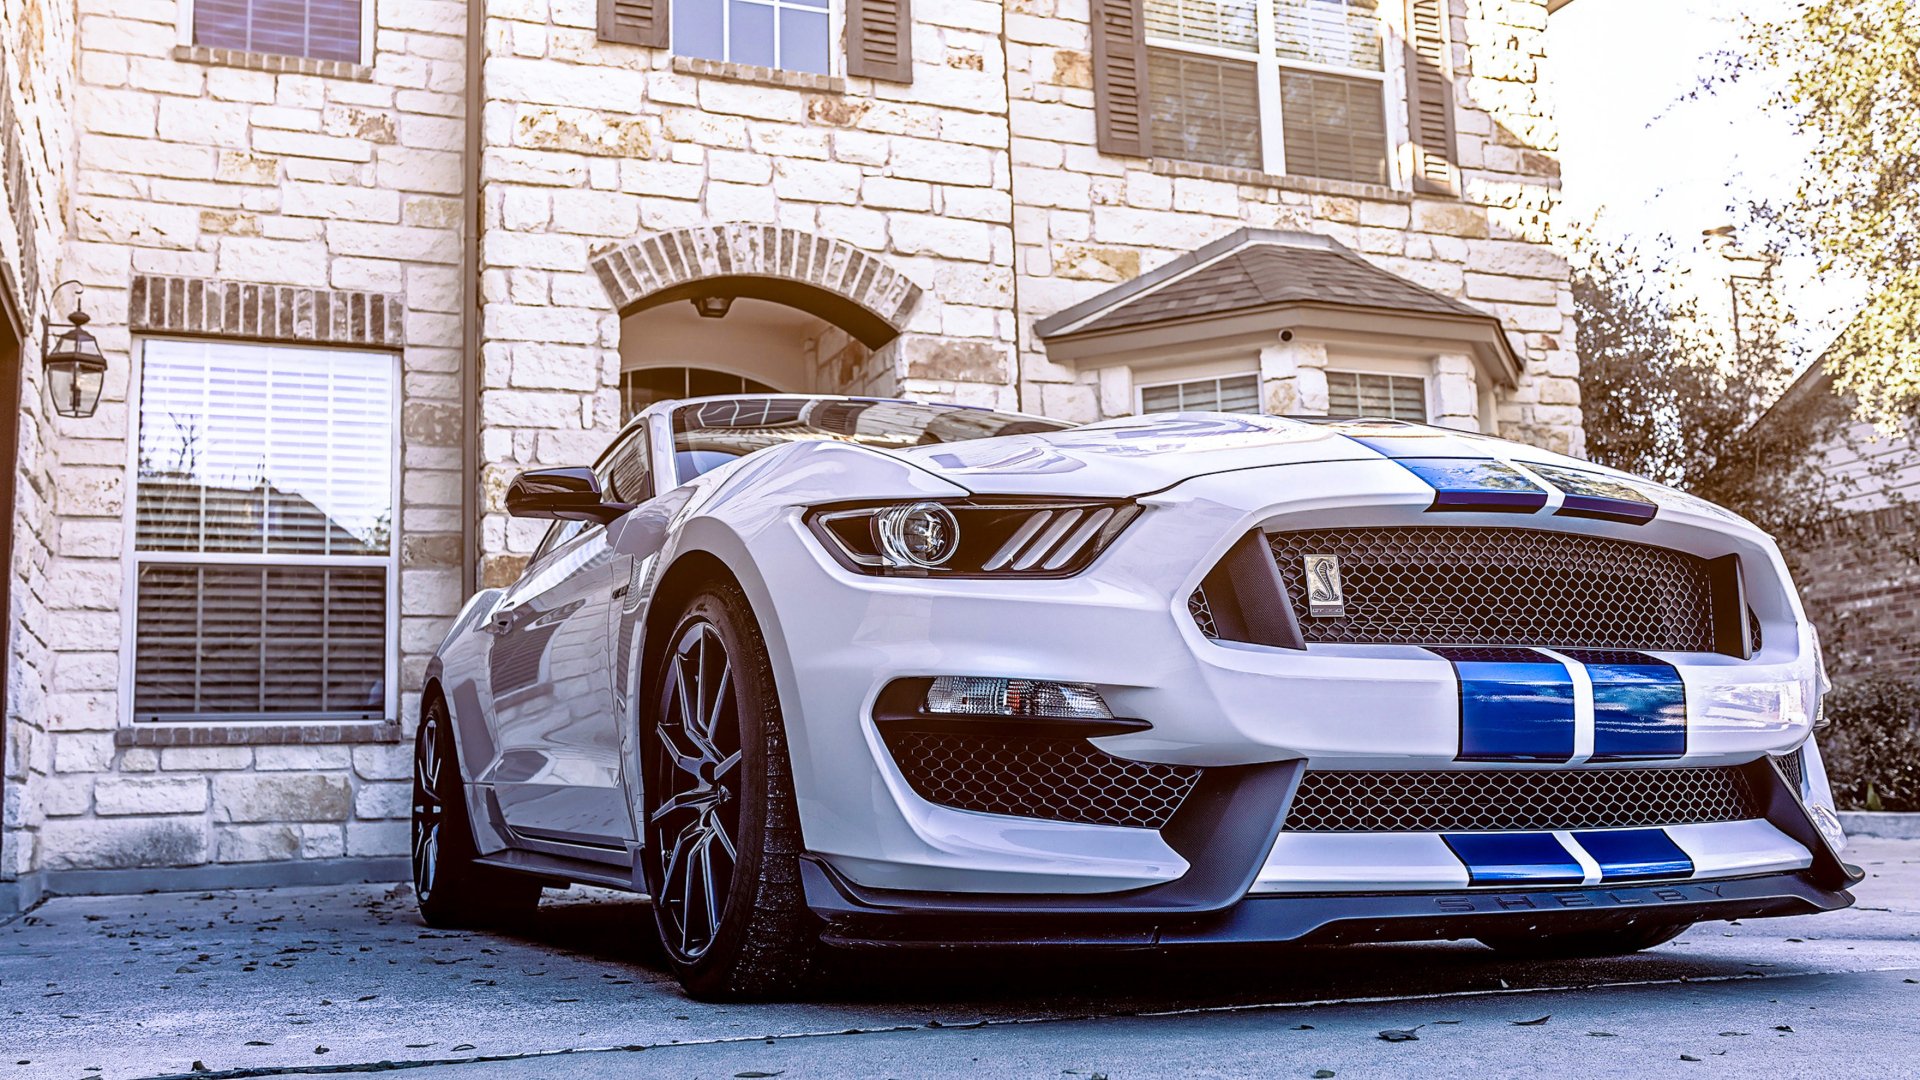 Ford Mustang Shelby GT350 picture gallery - CarWale